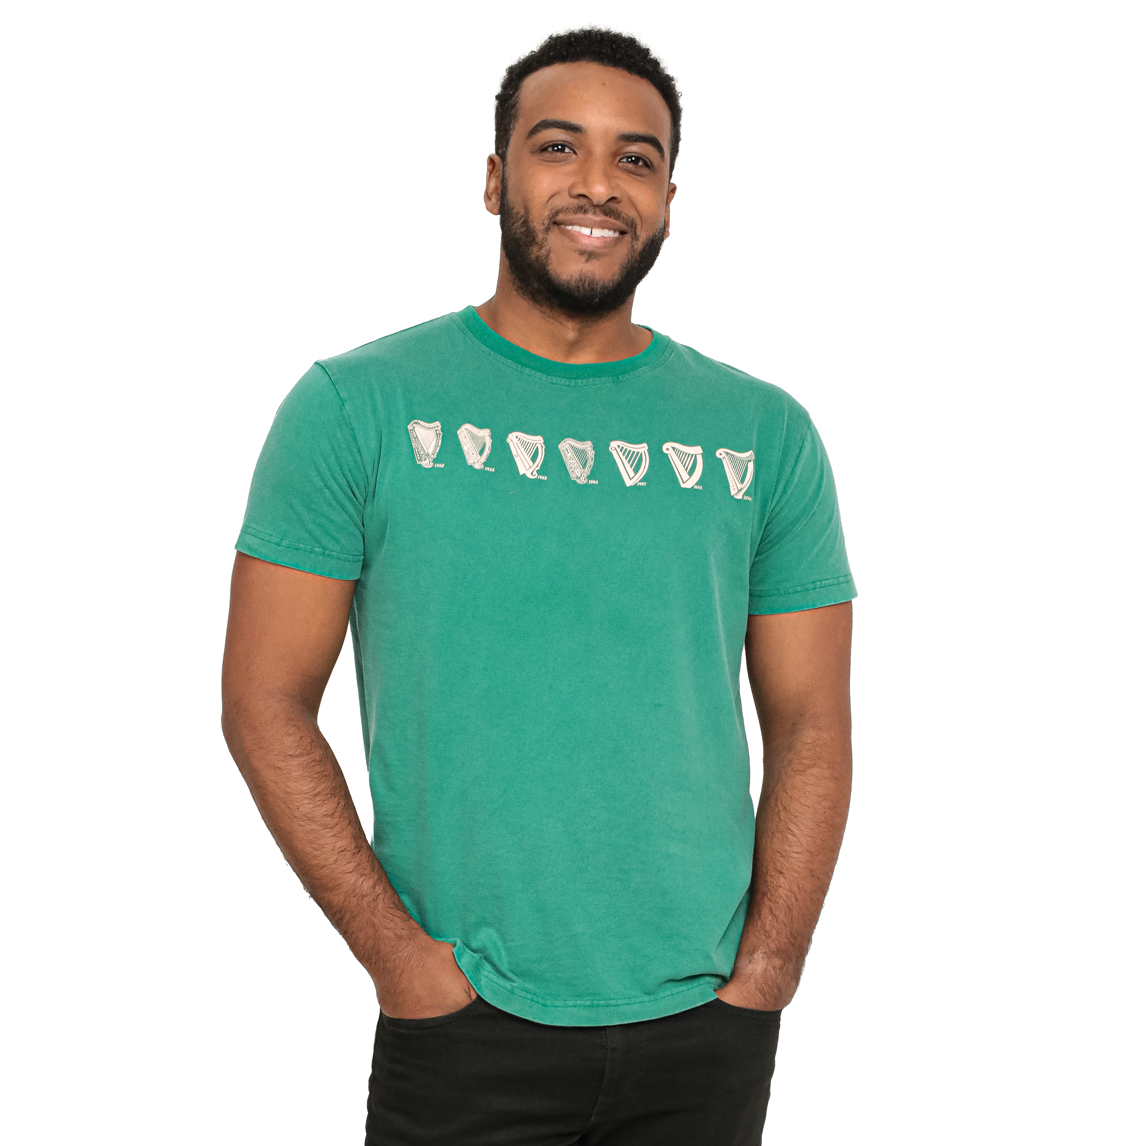 A man is smiling while wearing a Guinness Evolution Harp Green Tee.